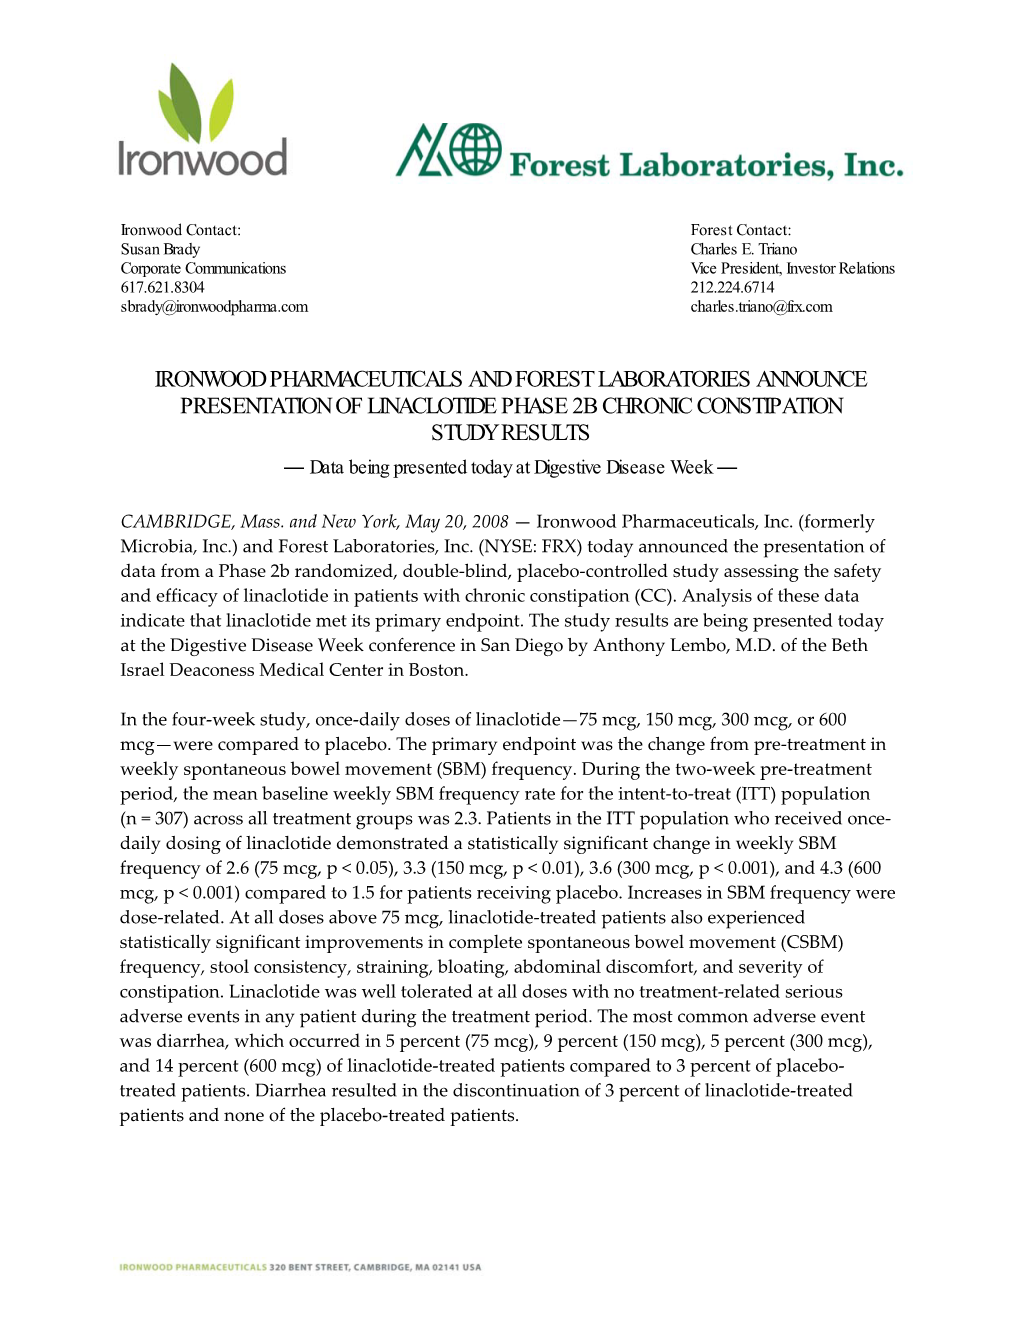 Ironwood Pharmaceuticals and Forest Laboratories Announce